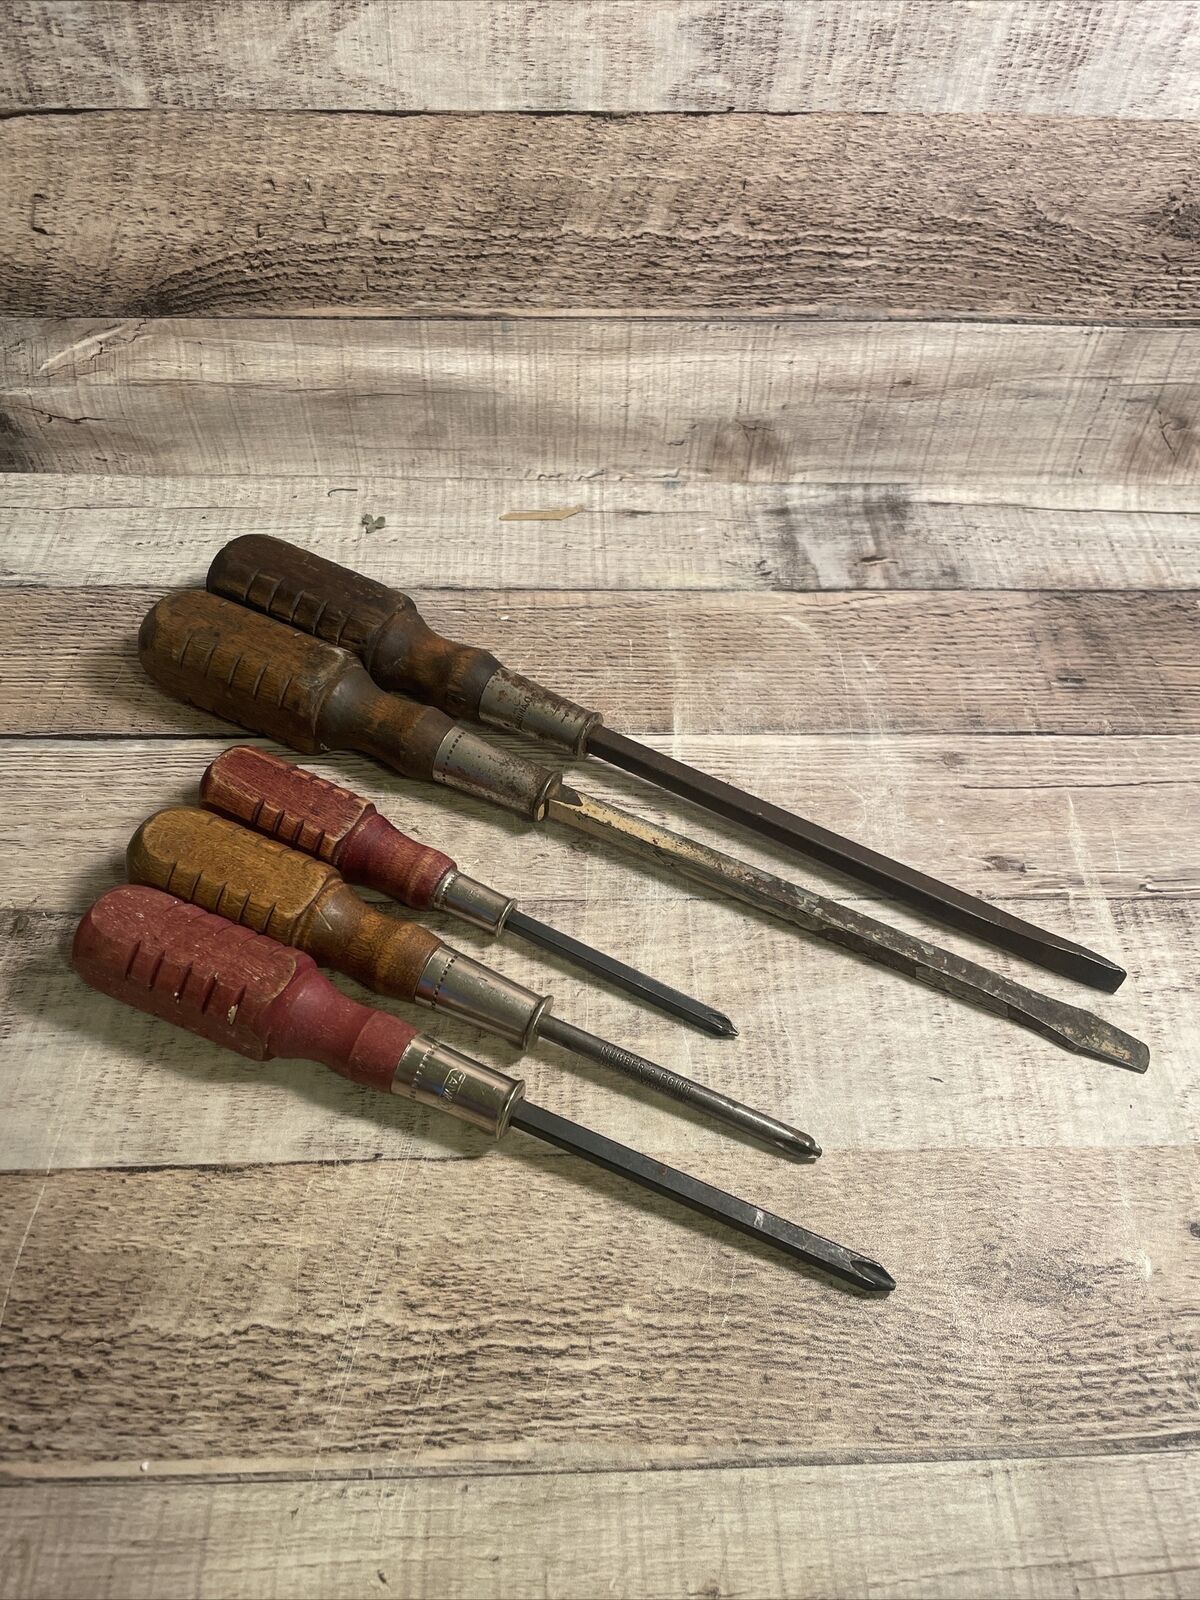 Lot Of 5 Vintage Wooden Handle Screwdrivers MAC Phillips USA Unbranded